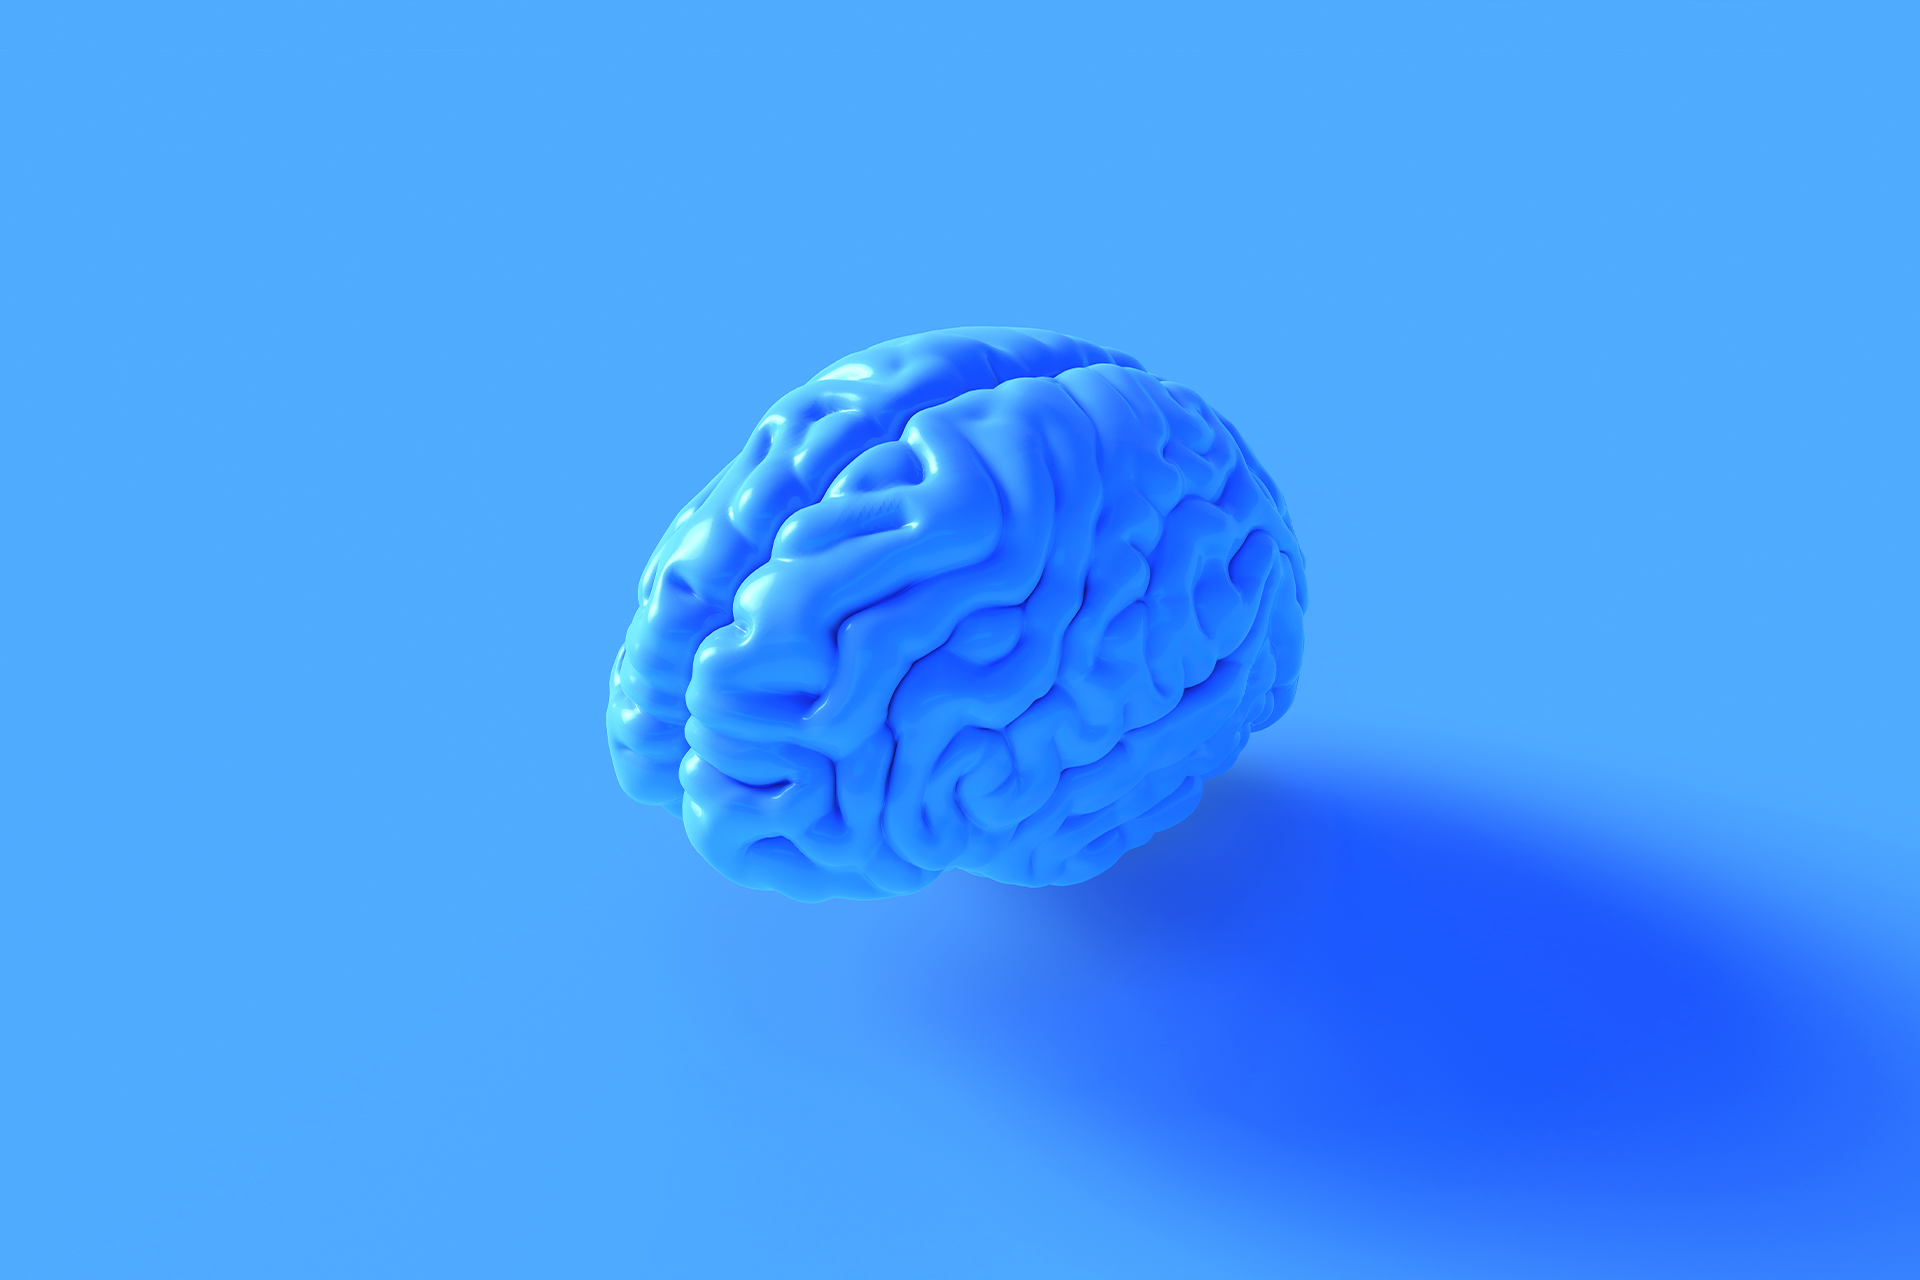 A model of the human brain that is blue set against a blue background. We think (get it) was the perfect choice for our blog on market intelligence.